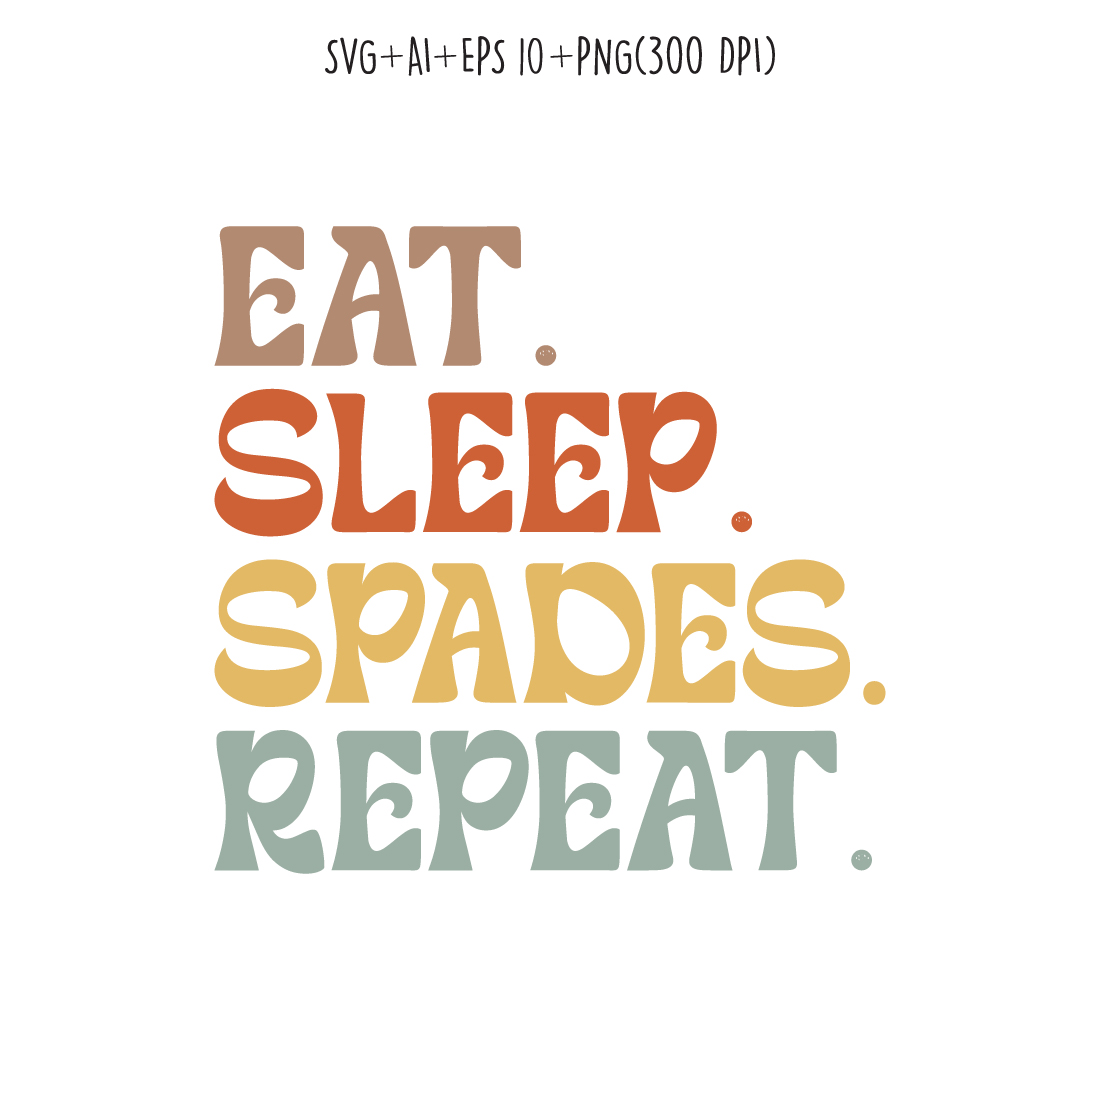 Eat Sleep Spades Repeat indoor game typography design for t-shirts, cards, frame artwork, phone cases, bags, mugs, stickers, tumblers, print, etc preview image.